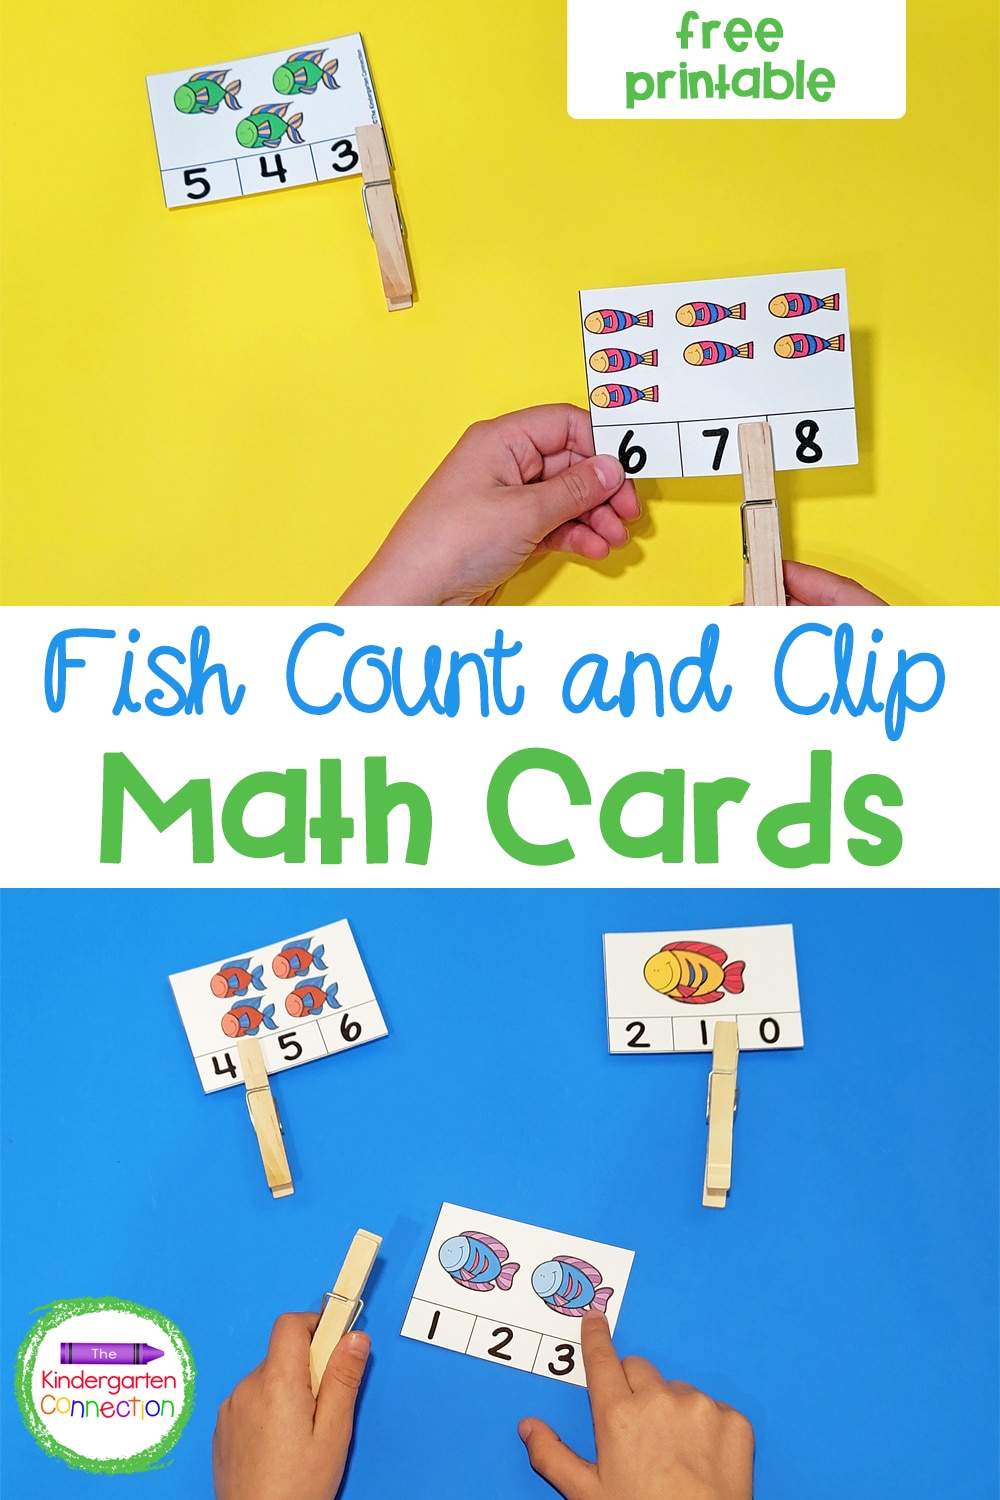 Work on counting sets, recognizing numbers to 12, and a bit of fine motor skills too with these free Fish Count and Clip Cards!